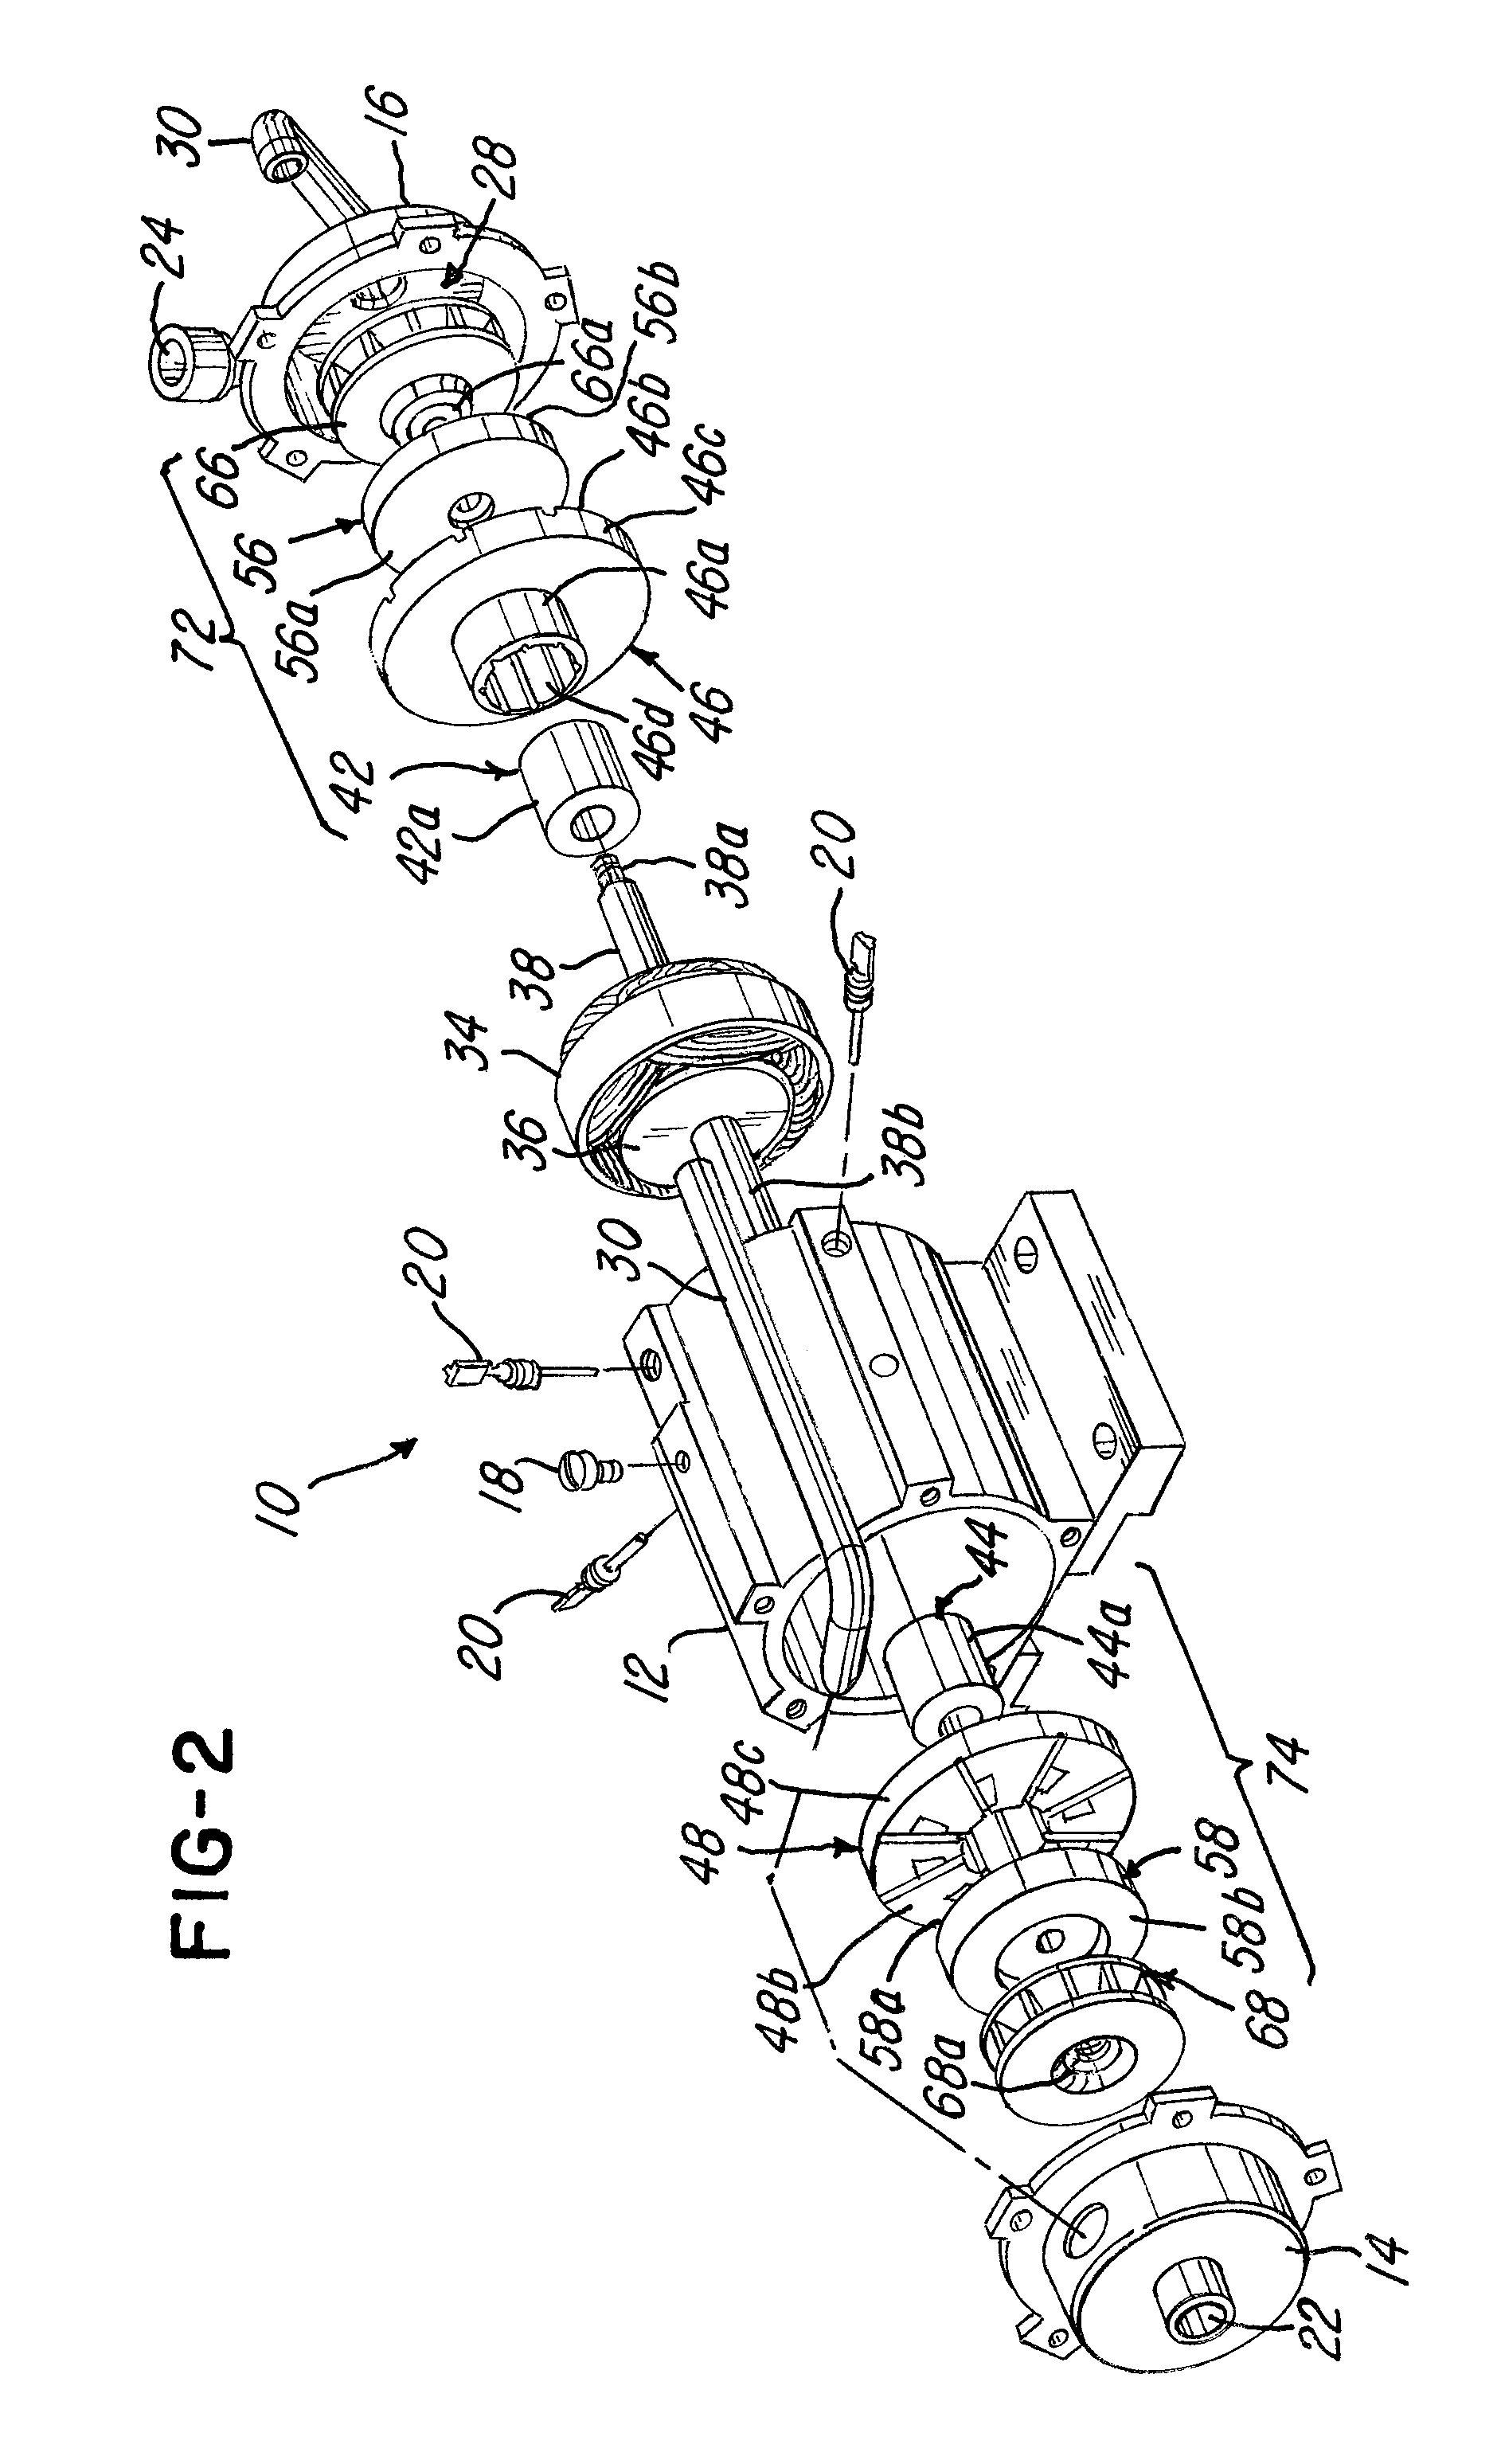 Two-stage hydrodynamic pump and method